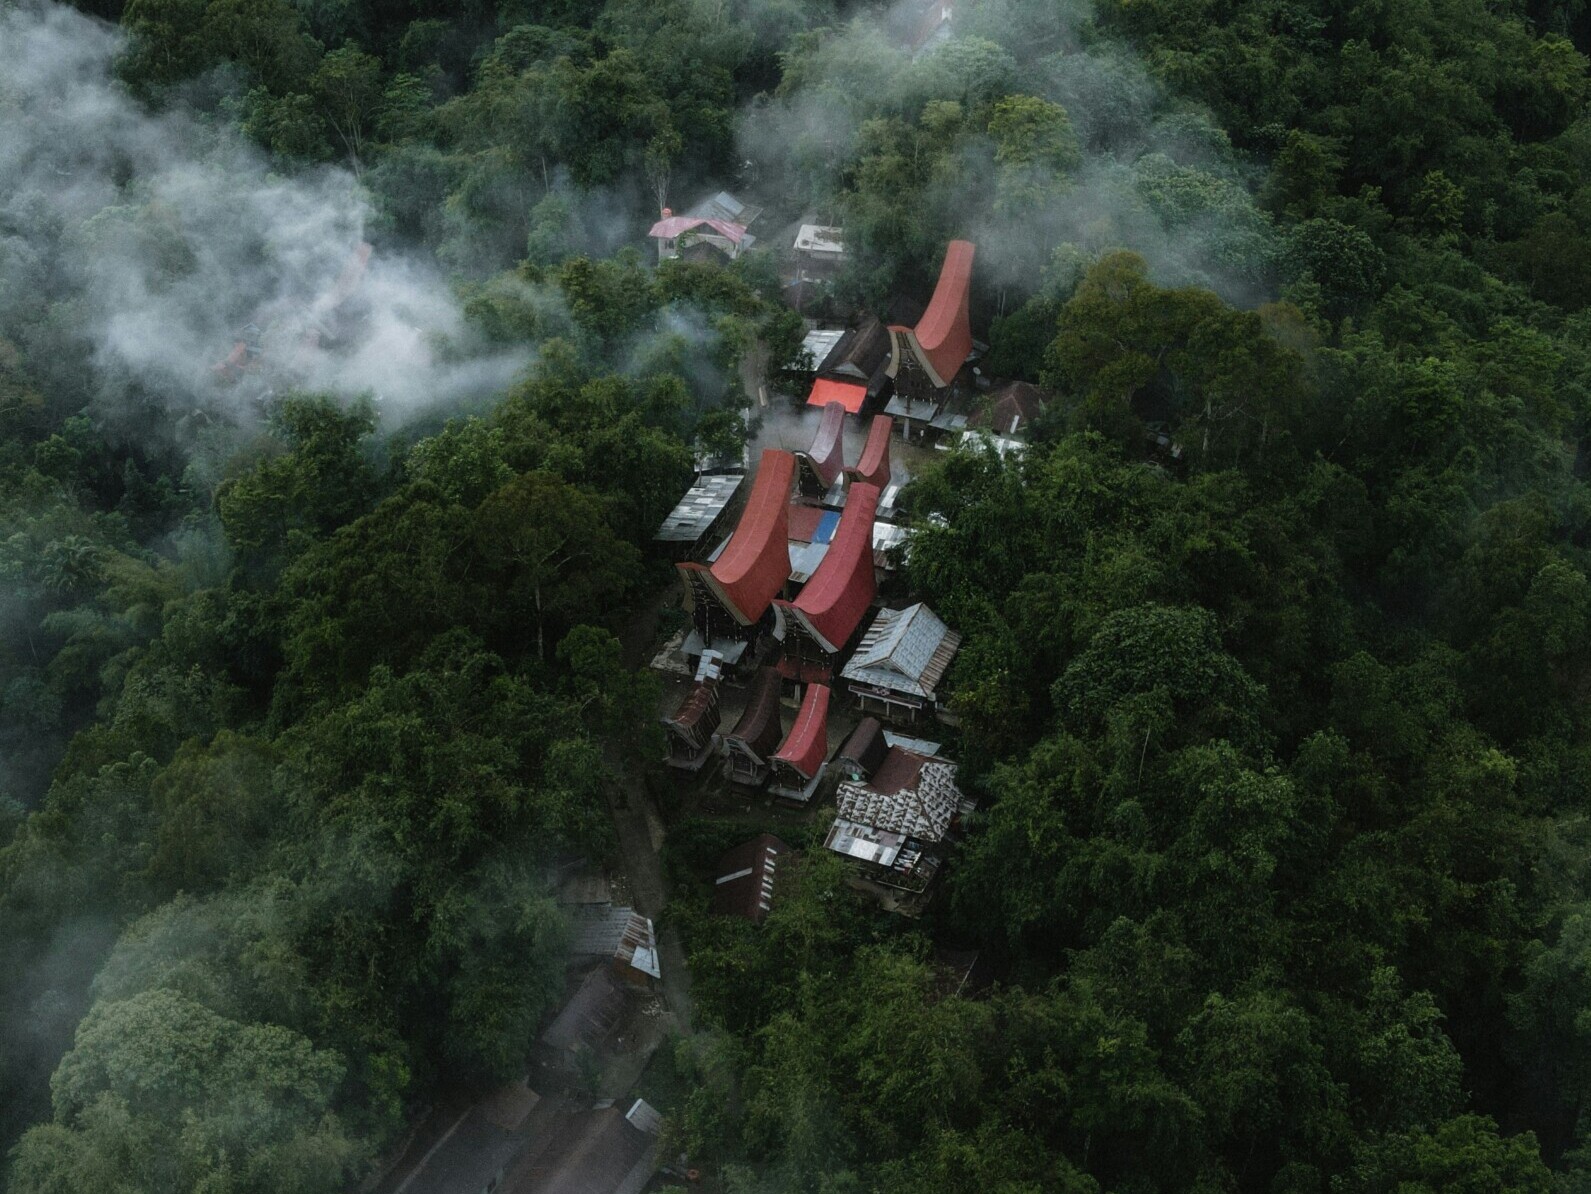 an aerial view of a house in the middle of a forest